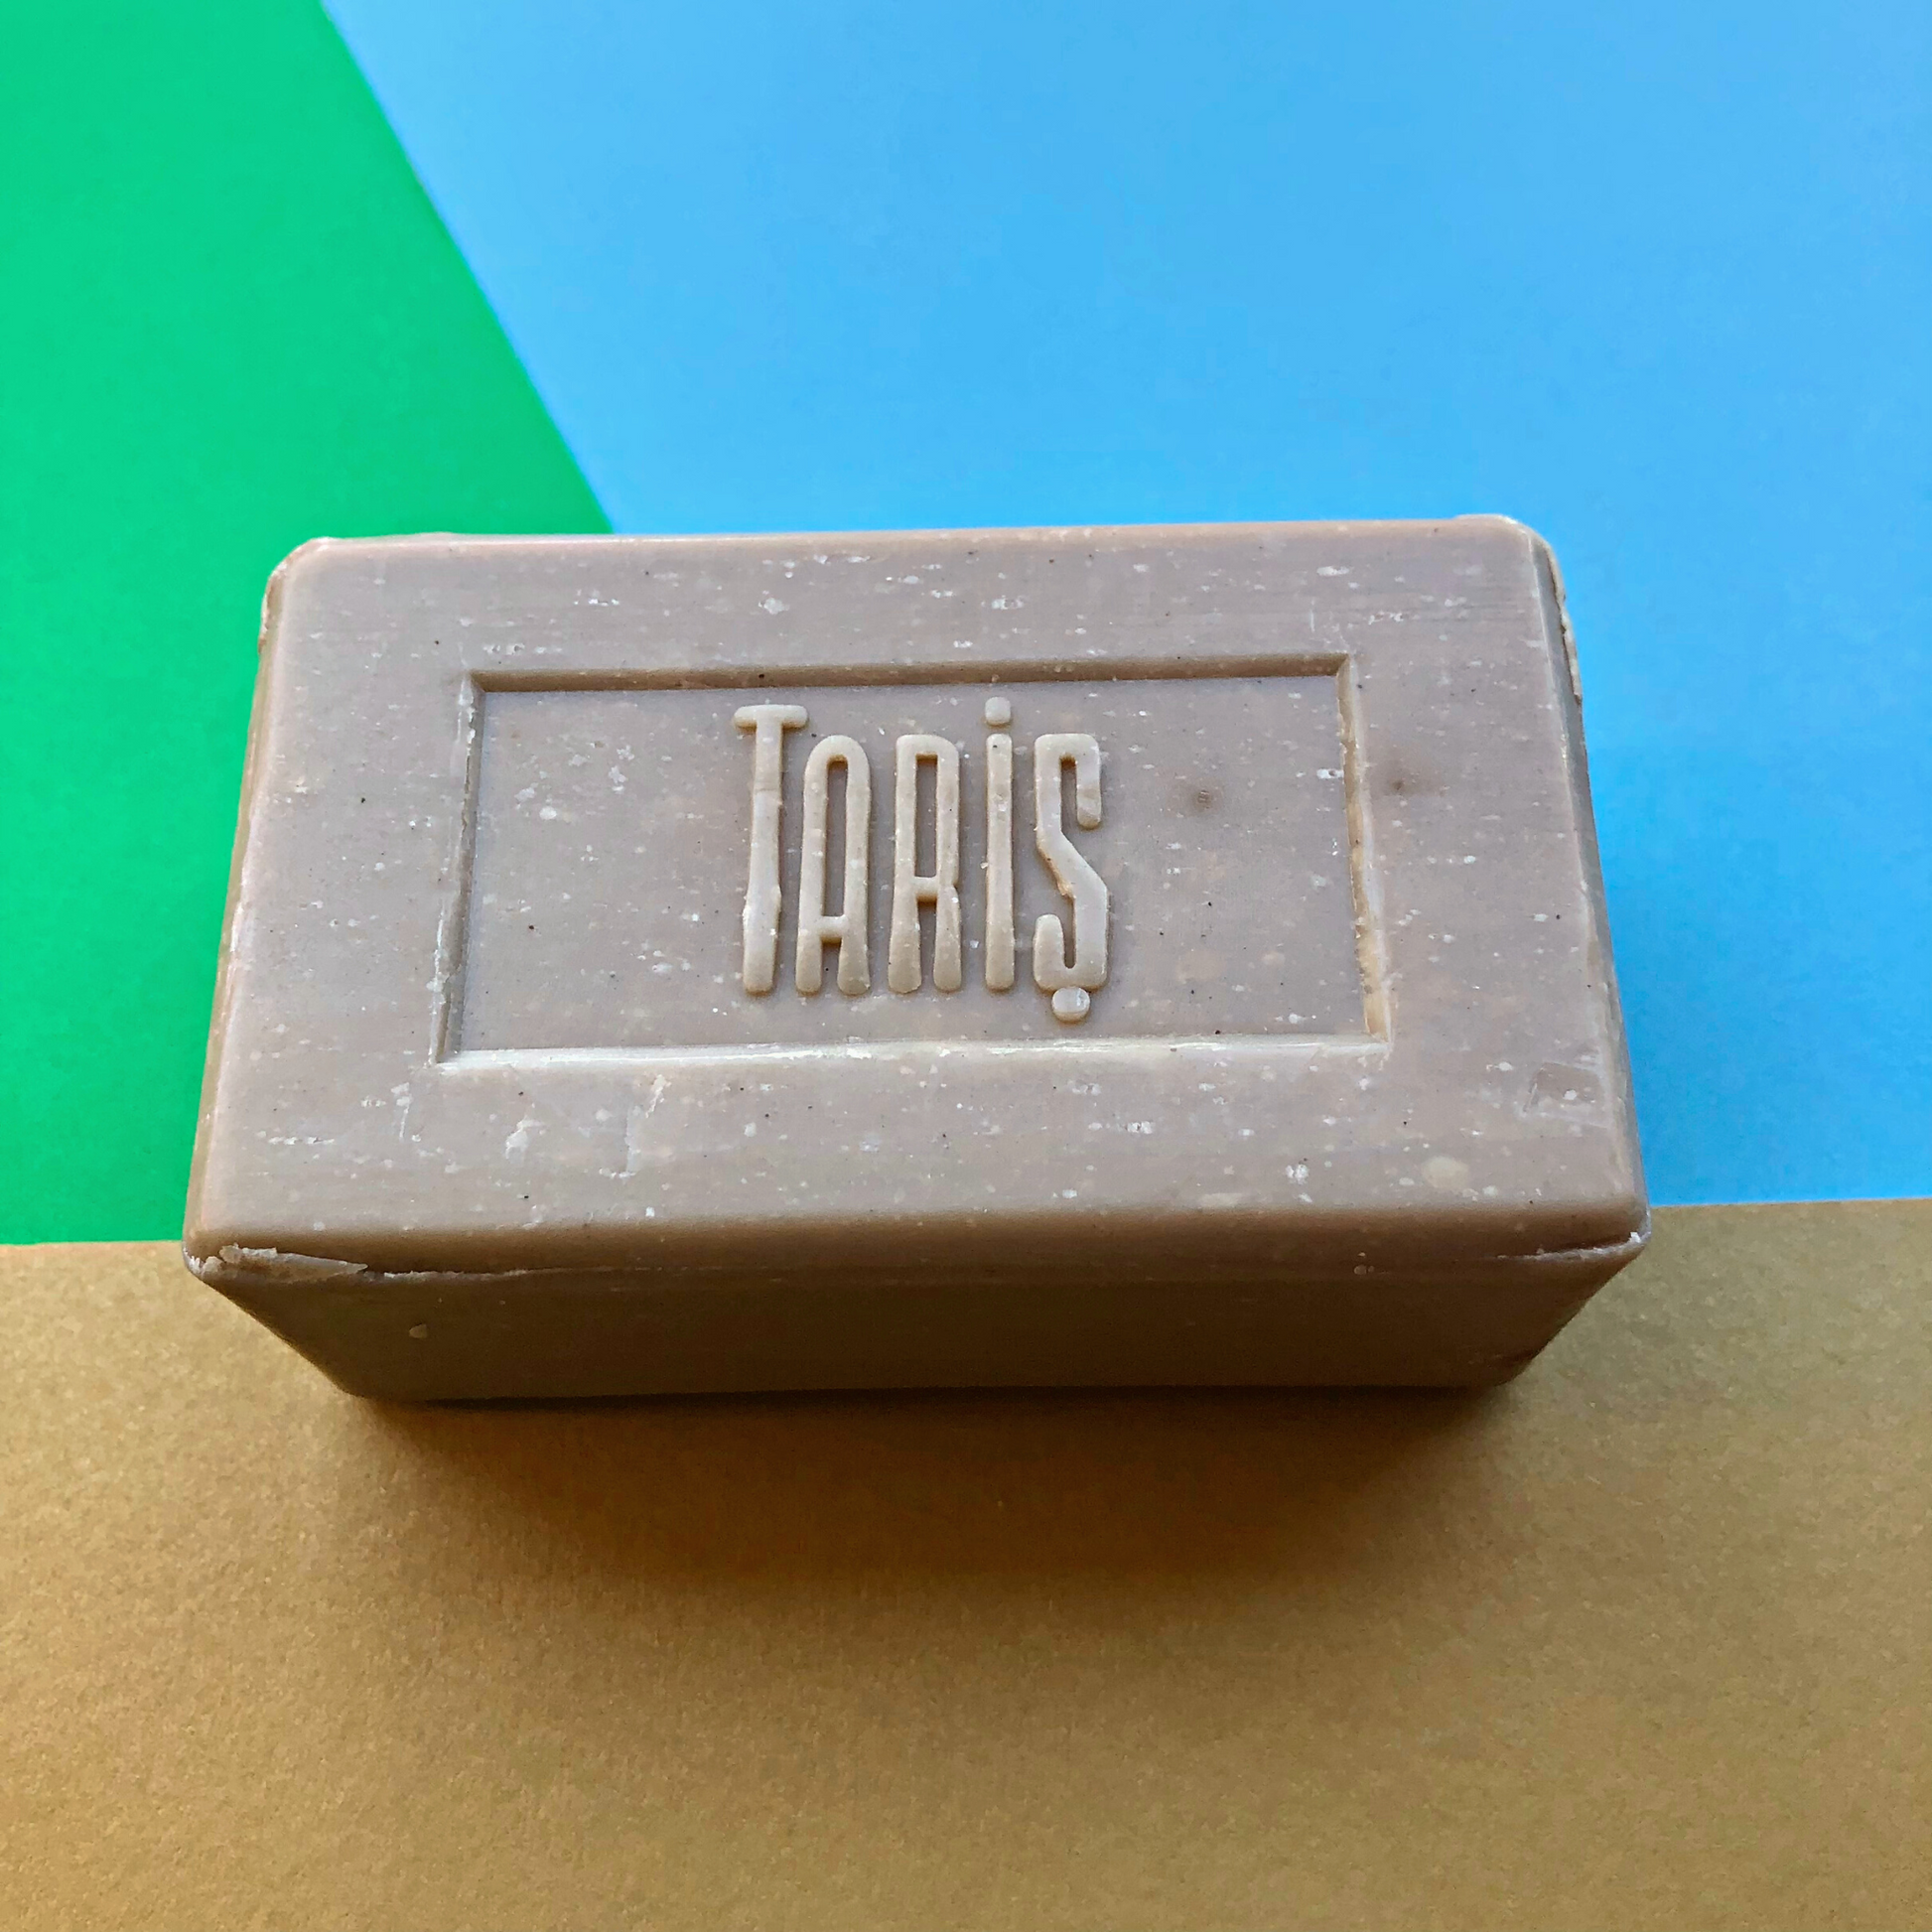 OLIVE OIL Soap with Mud on colourful background